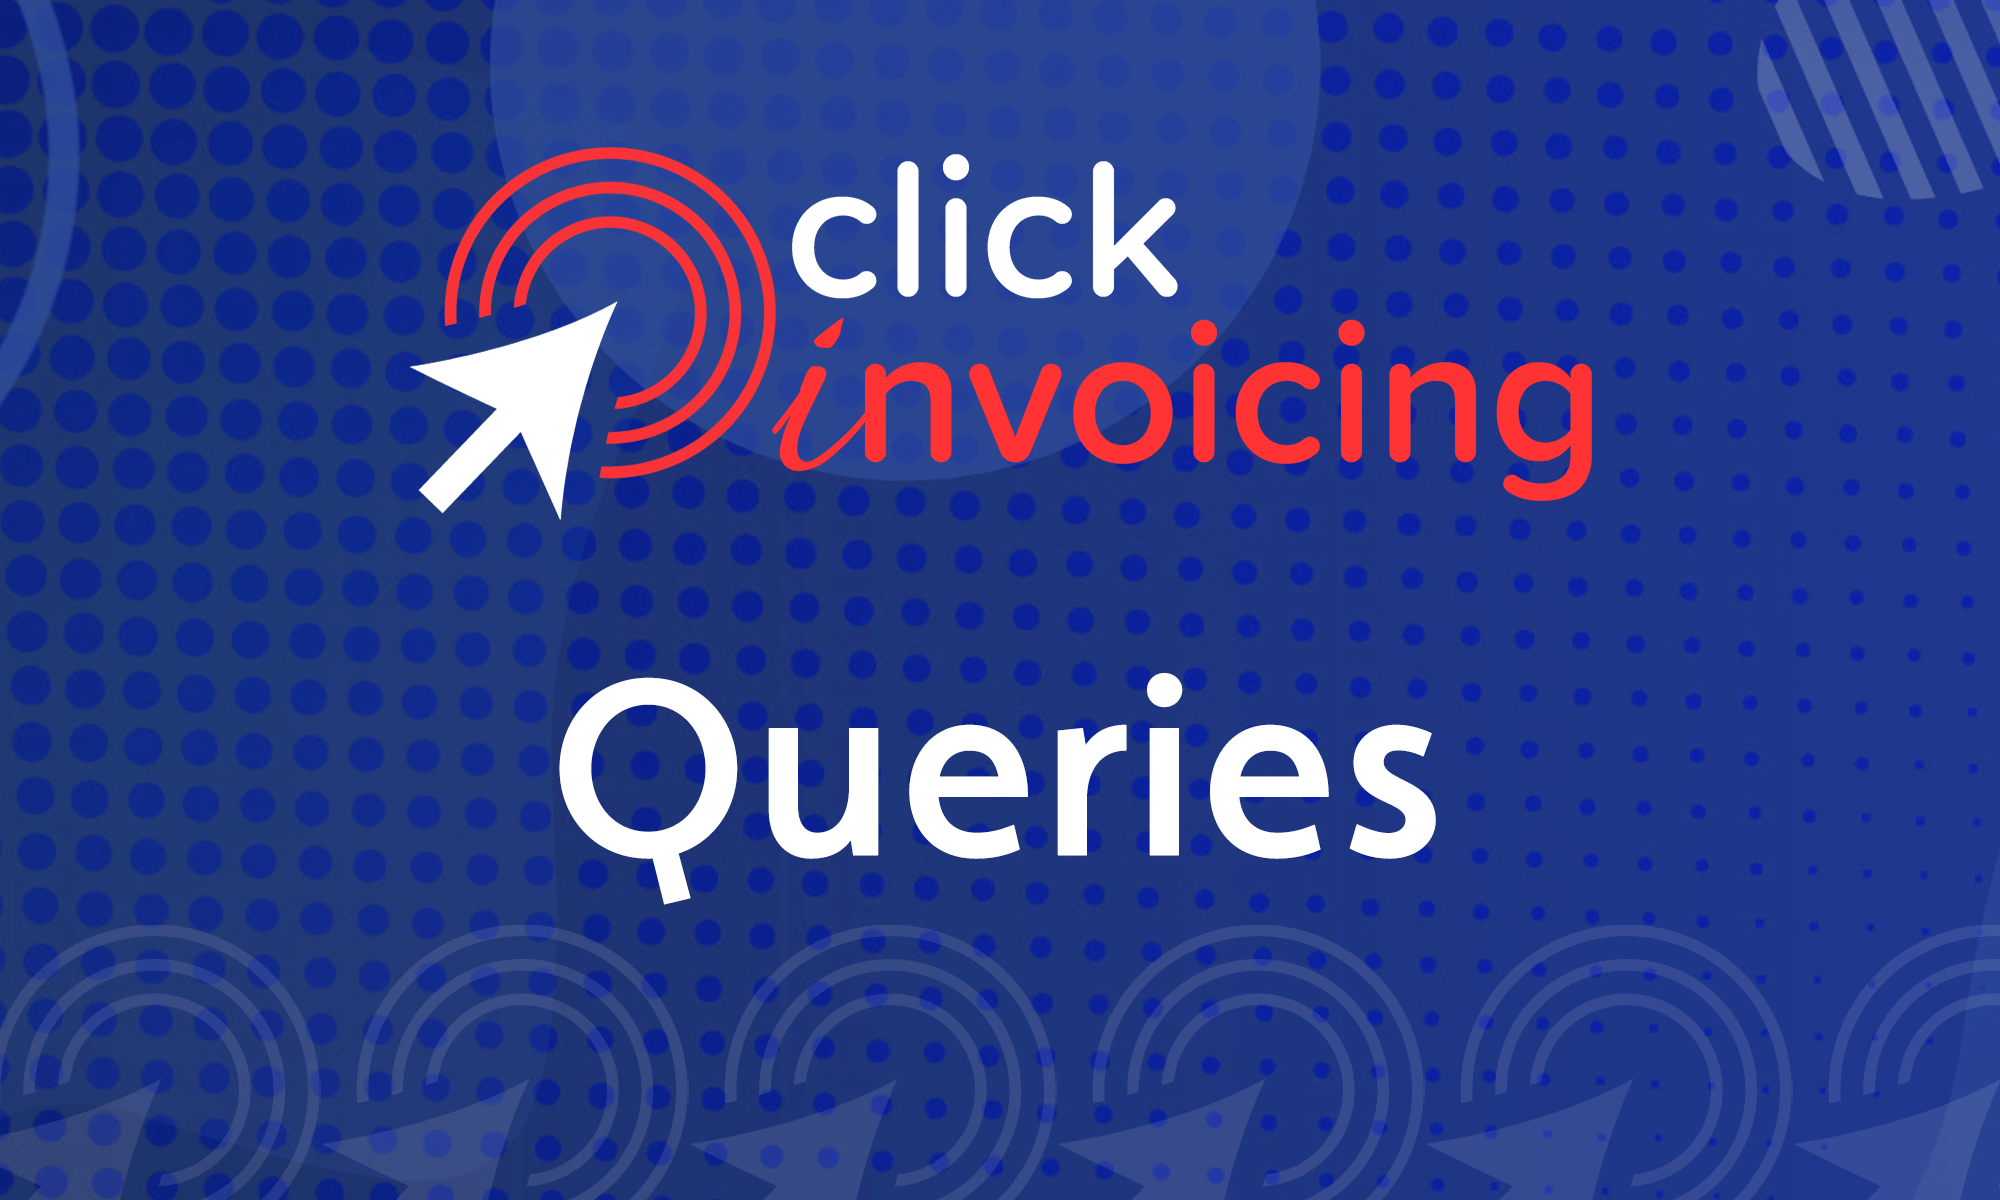 Featured image for “Click Invoicing Queries”